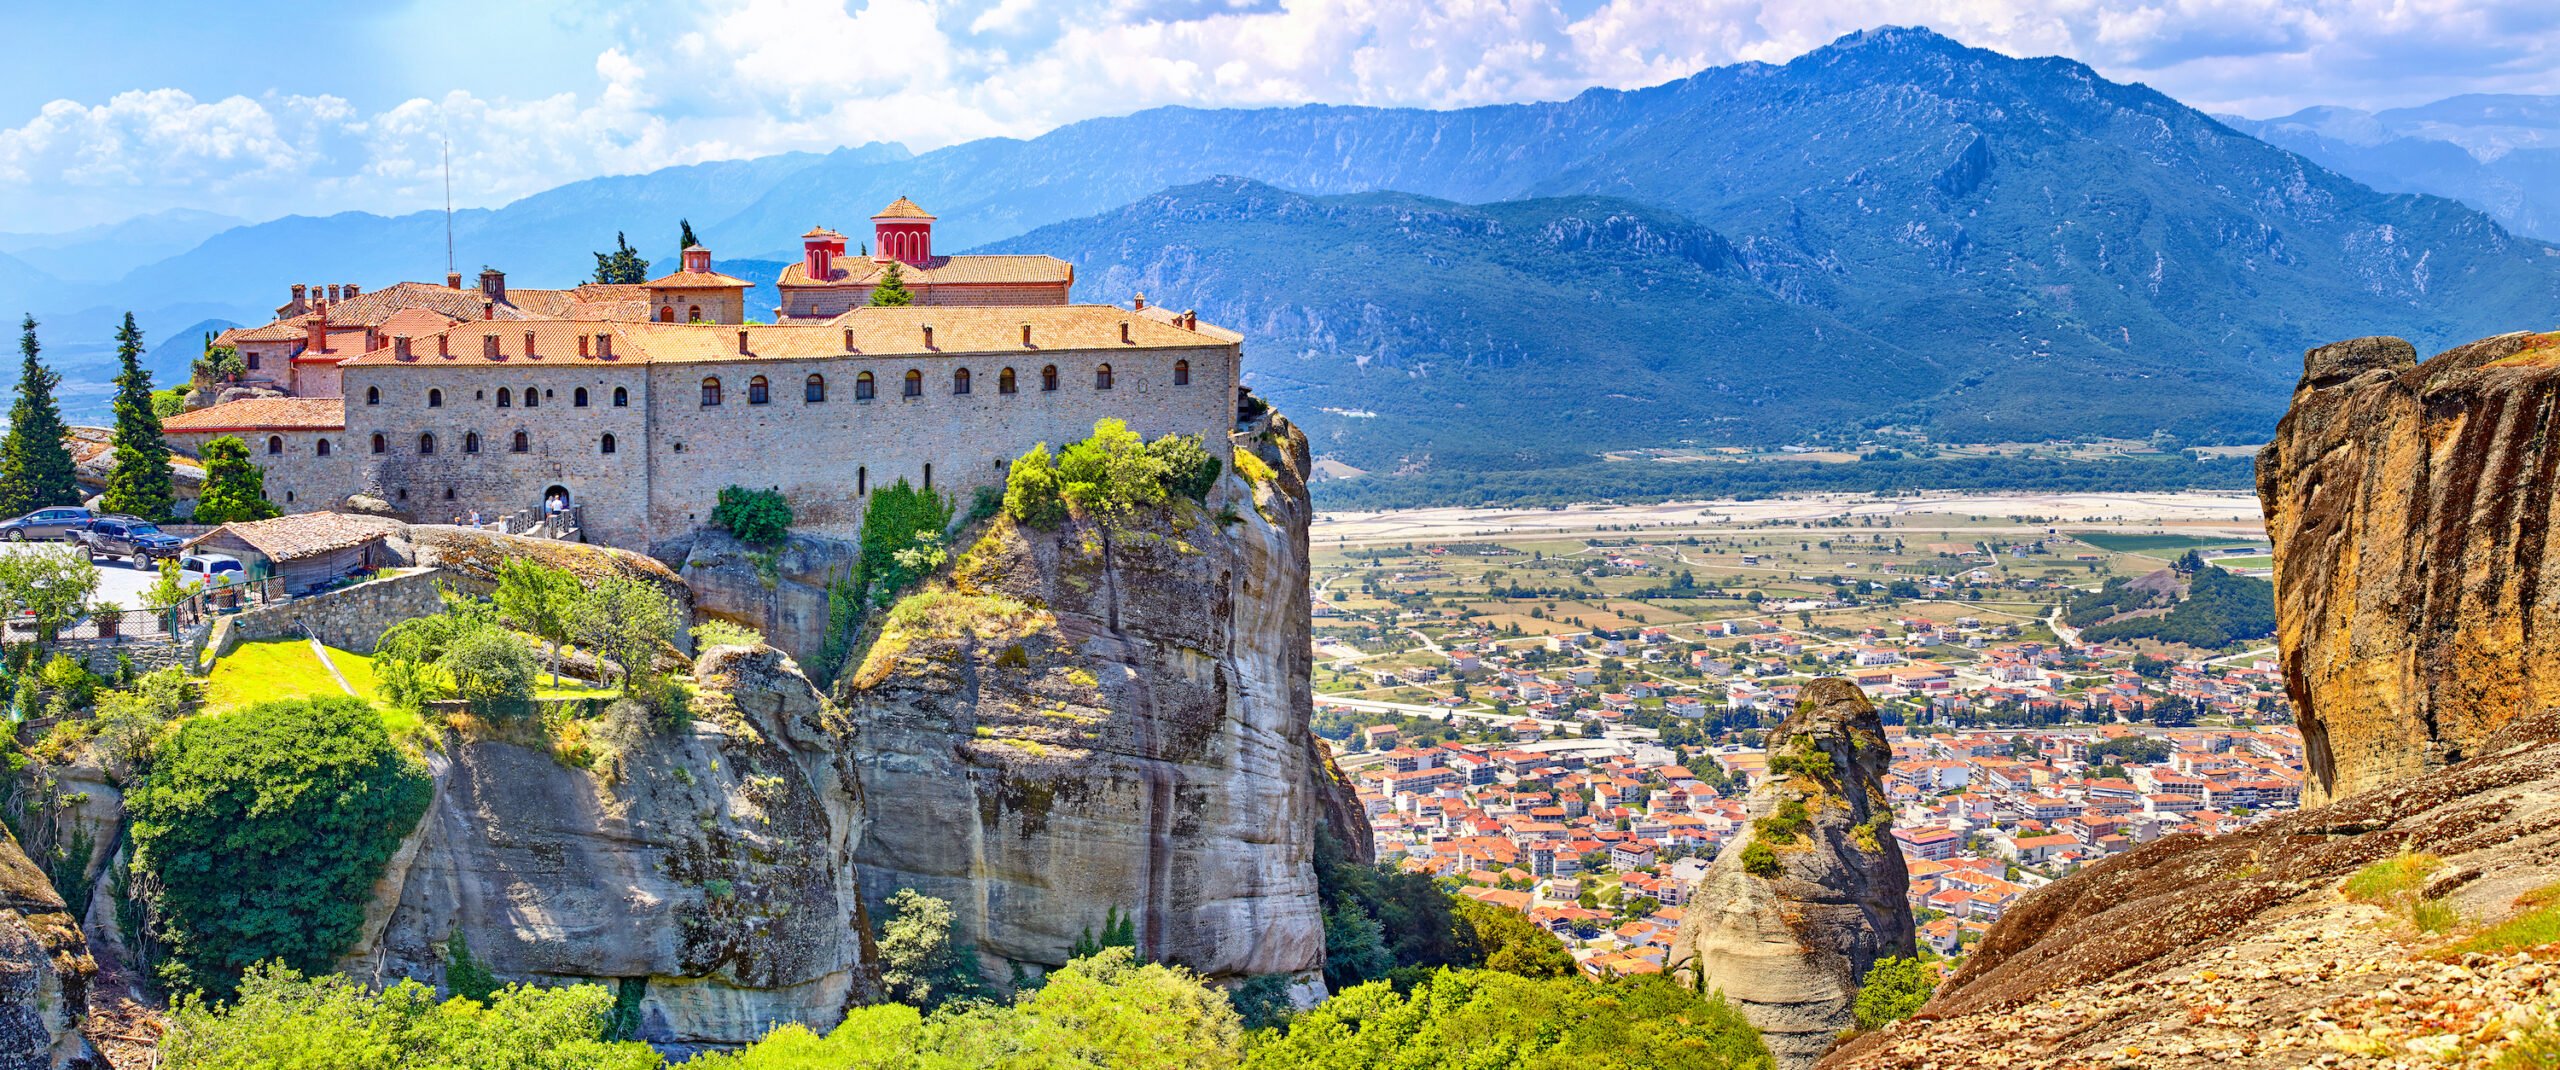 Northern Greece & Meteora 8 Day Tour Package 7